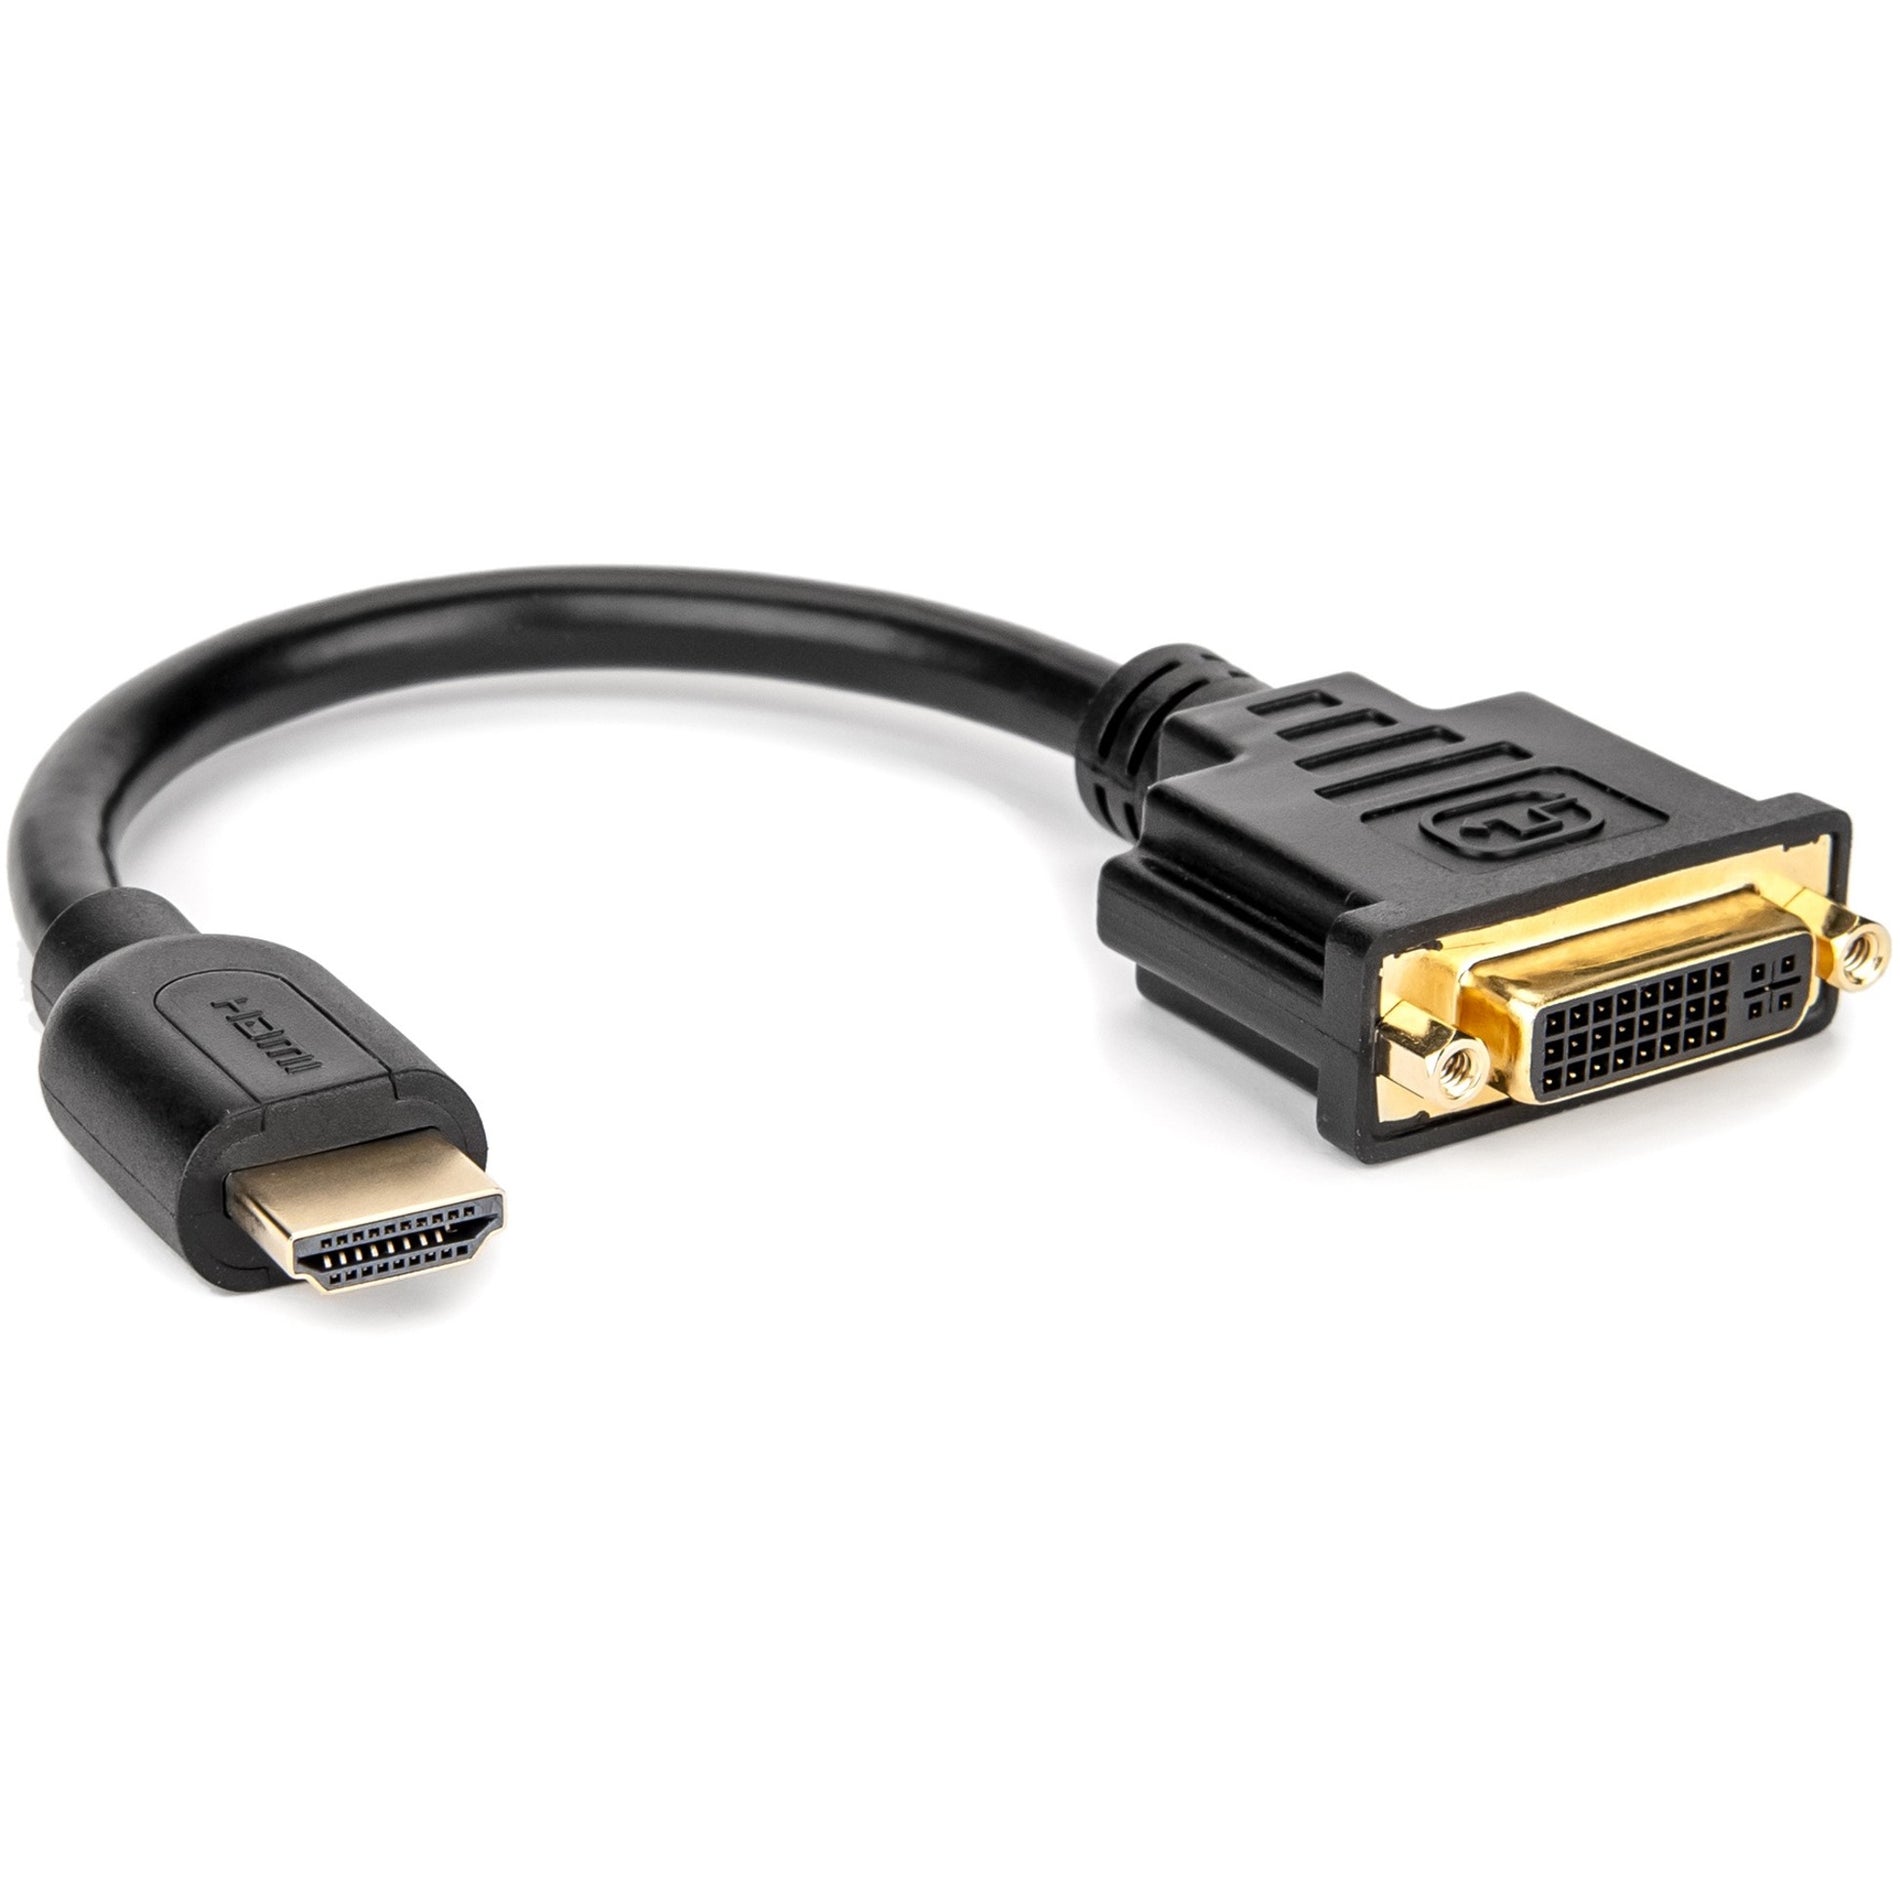 Rocstor Y10A171-B1 DVI-D/HDMI Video Cable, 8IN HDMI to DVI-D Adapter, Gold Plated Connectors, Black